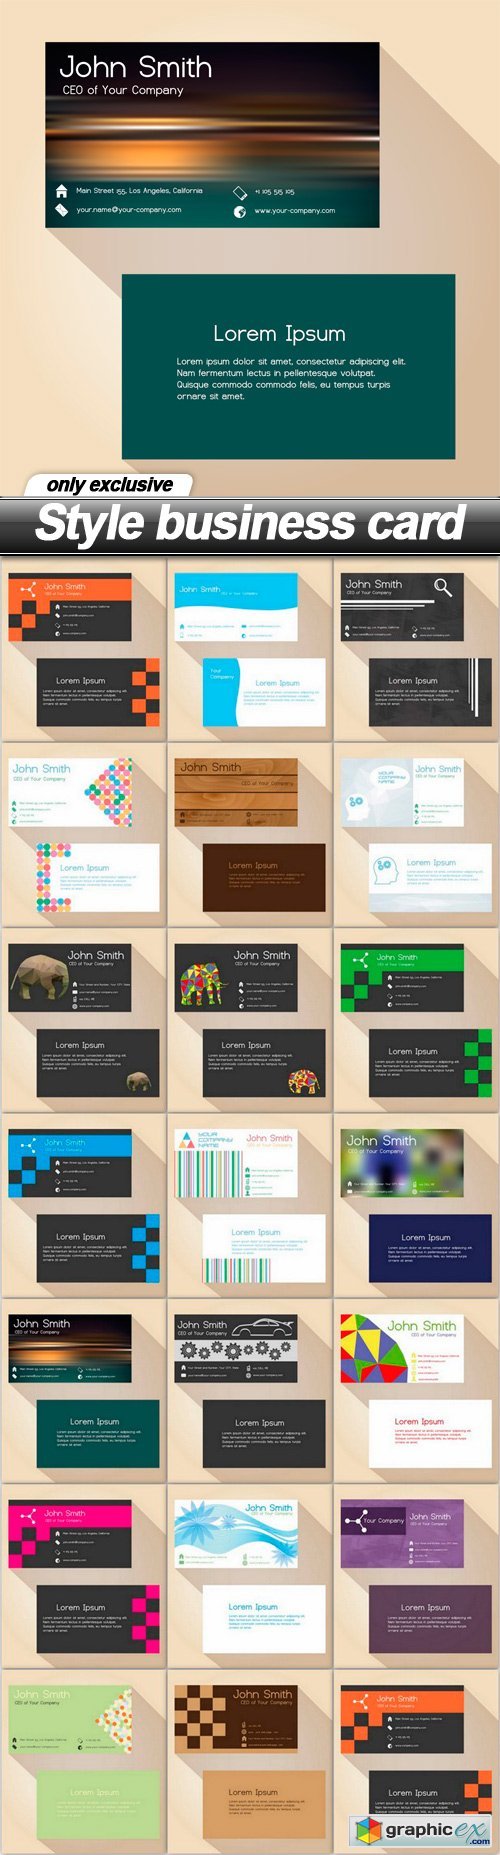 Style business card - 20 EPS